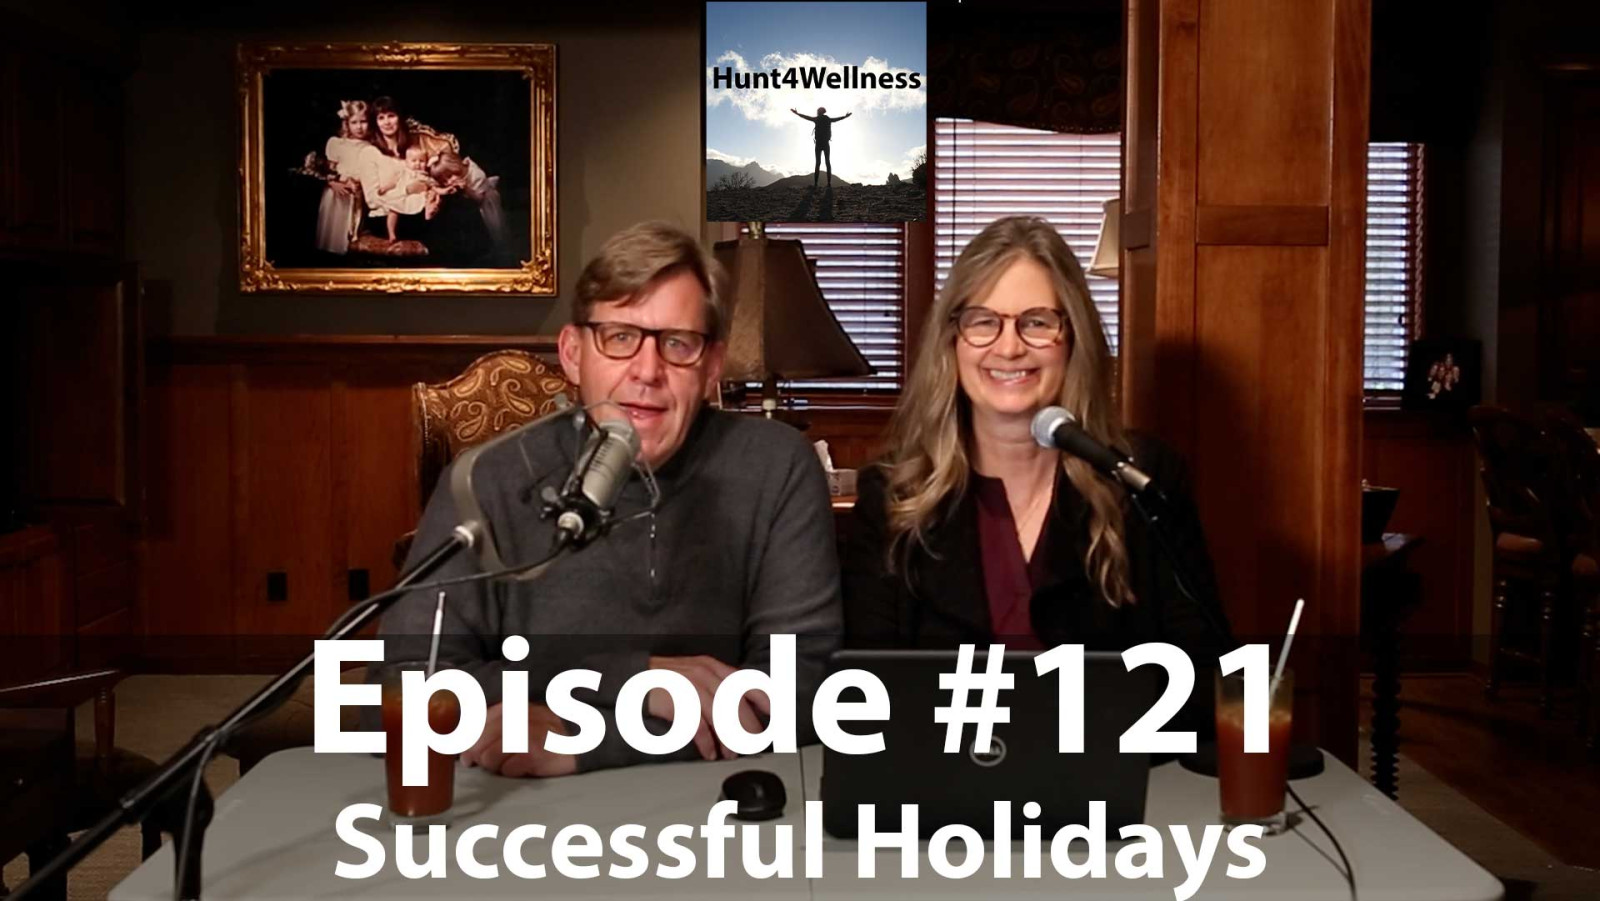 Episode #121 - Successful Holidays